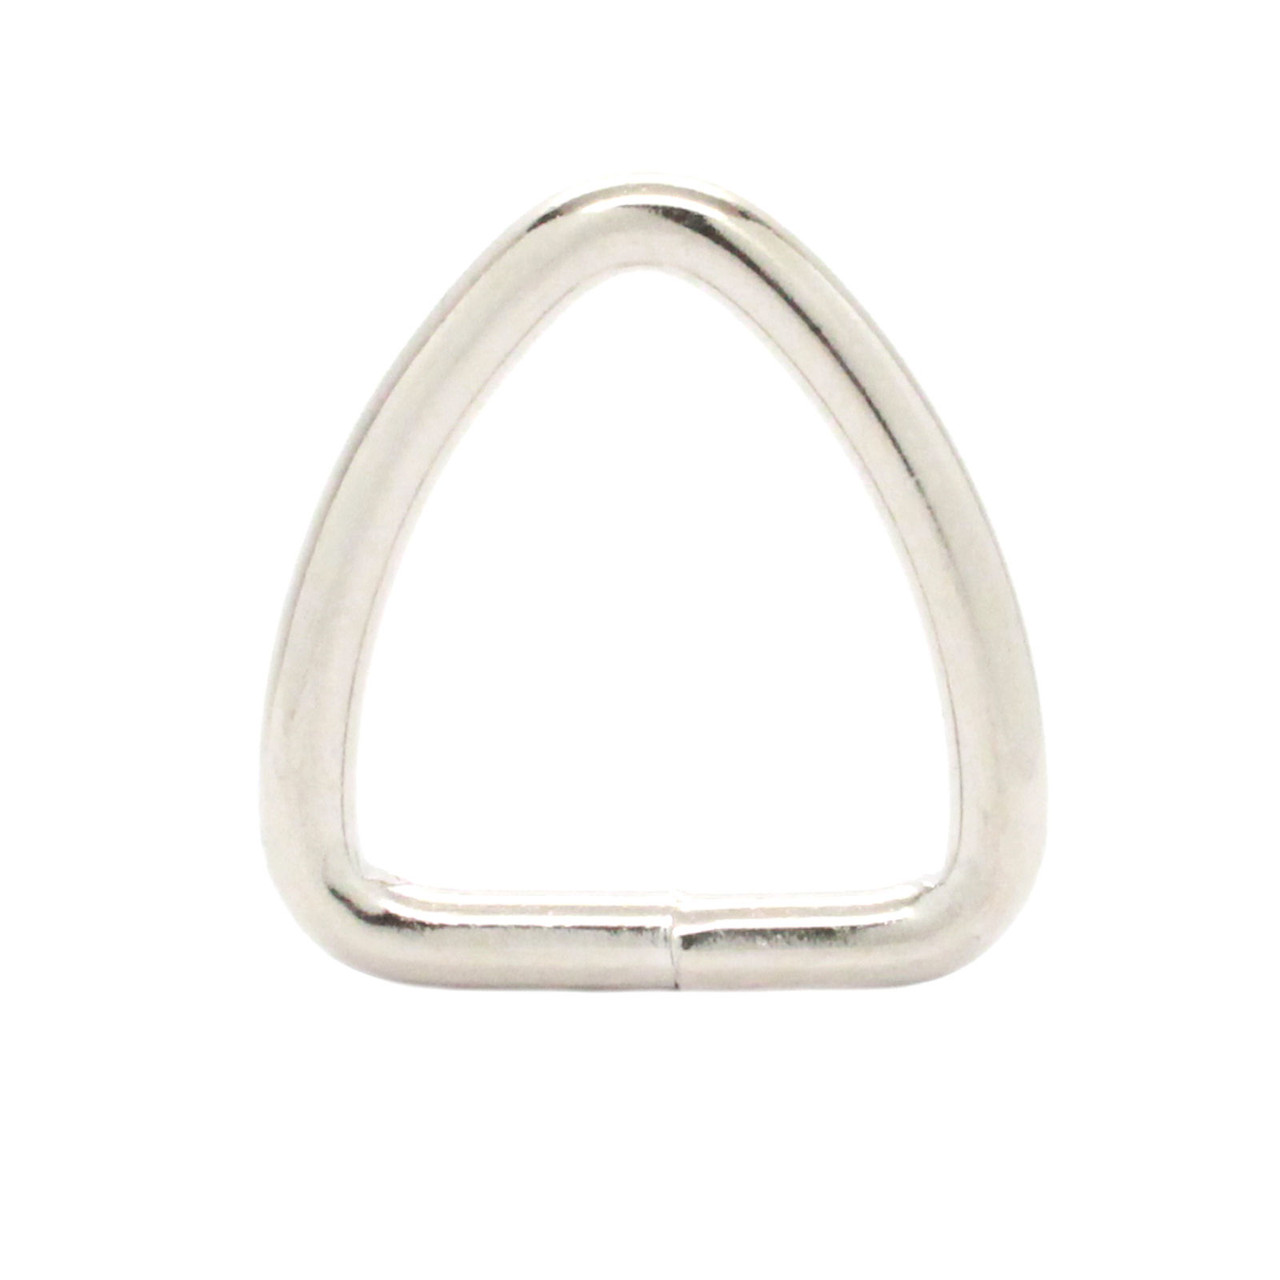 Elongated D-Ring 1 Inch